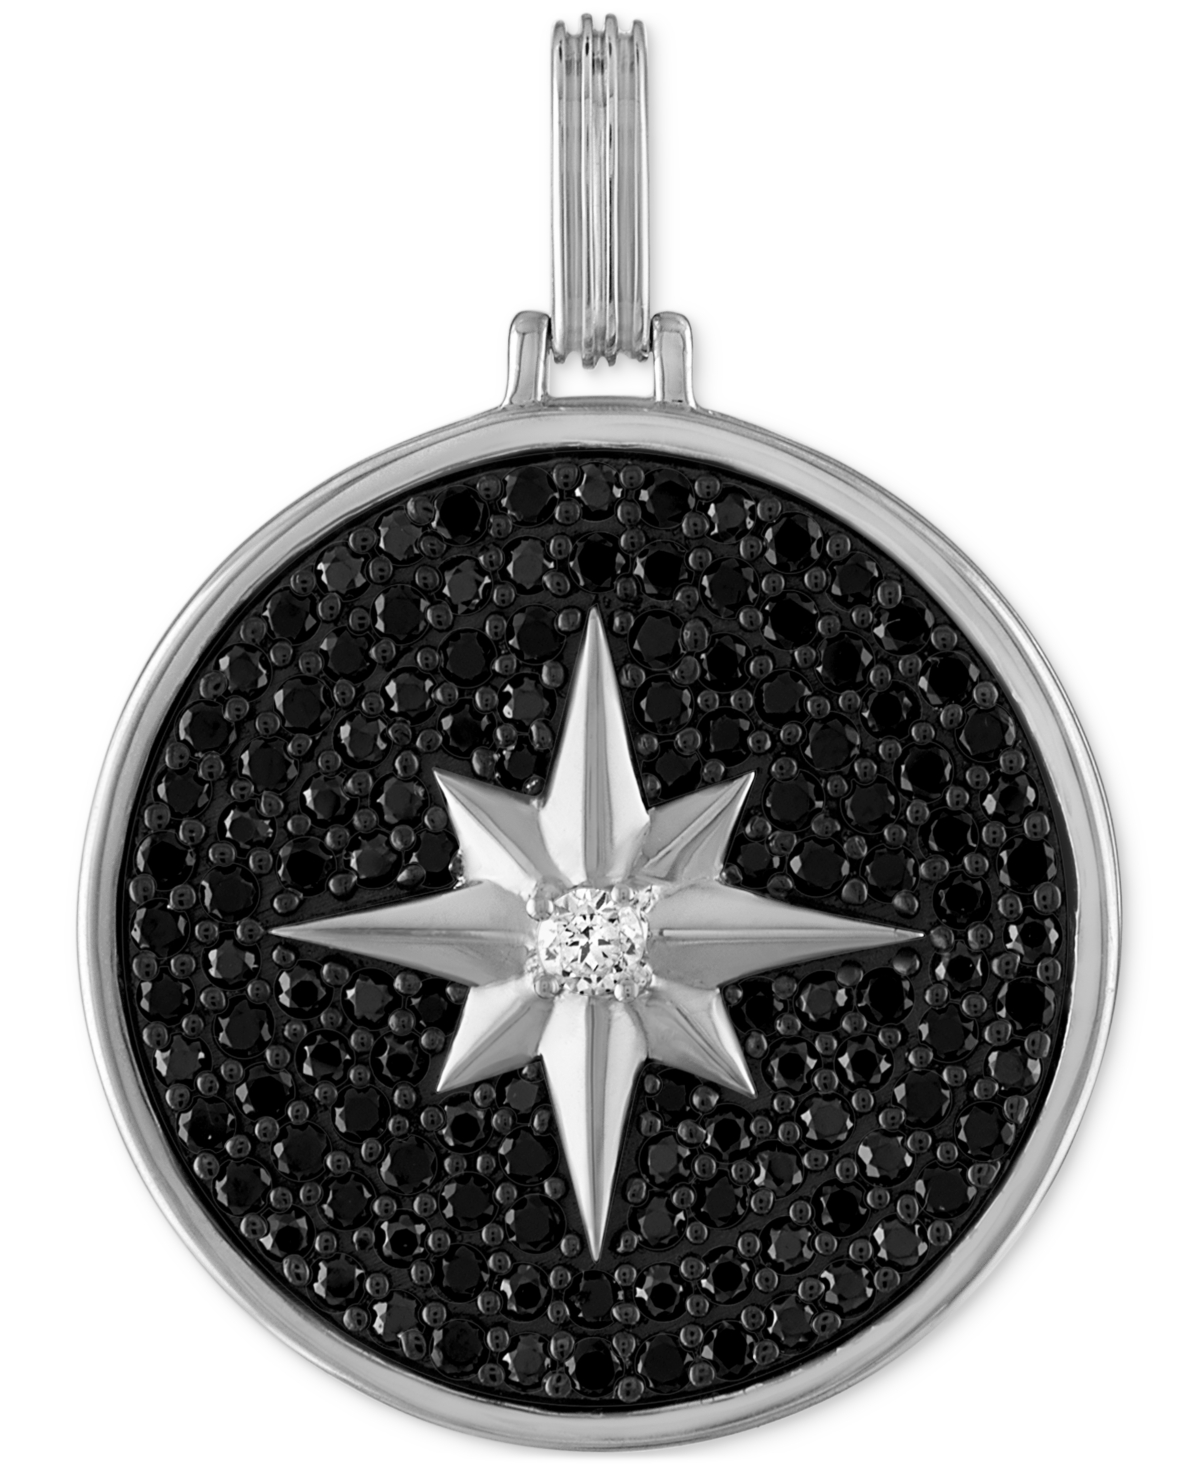 Black Spinel & Cubic Zirconia North Star Disc Pendant in Sterling Silver, Created for Macy's - Silver